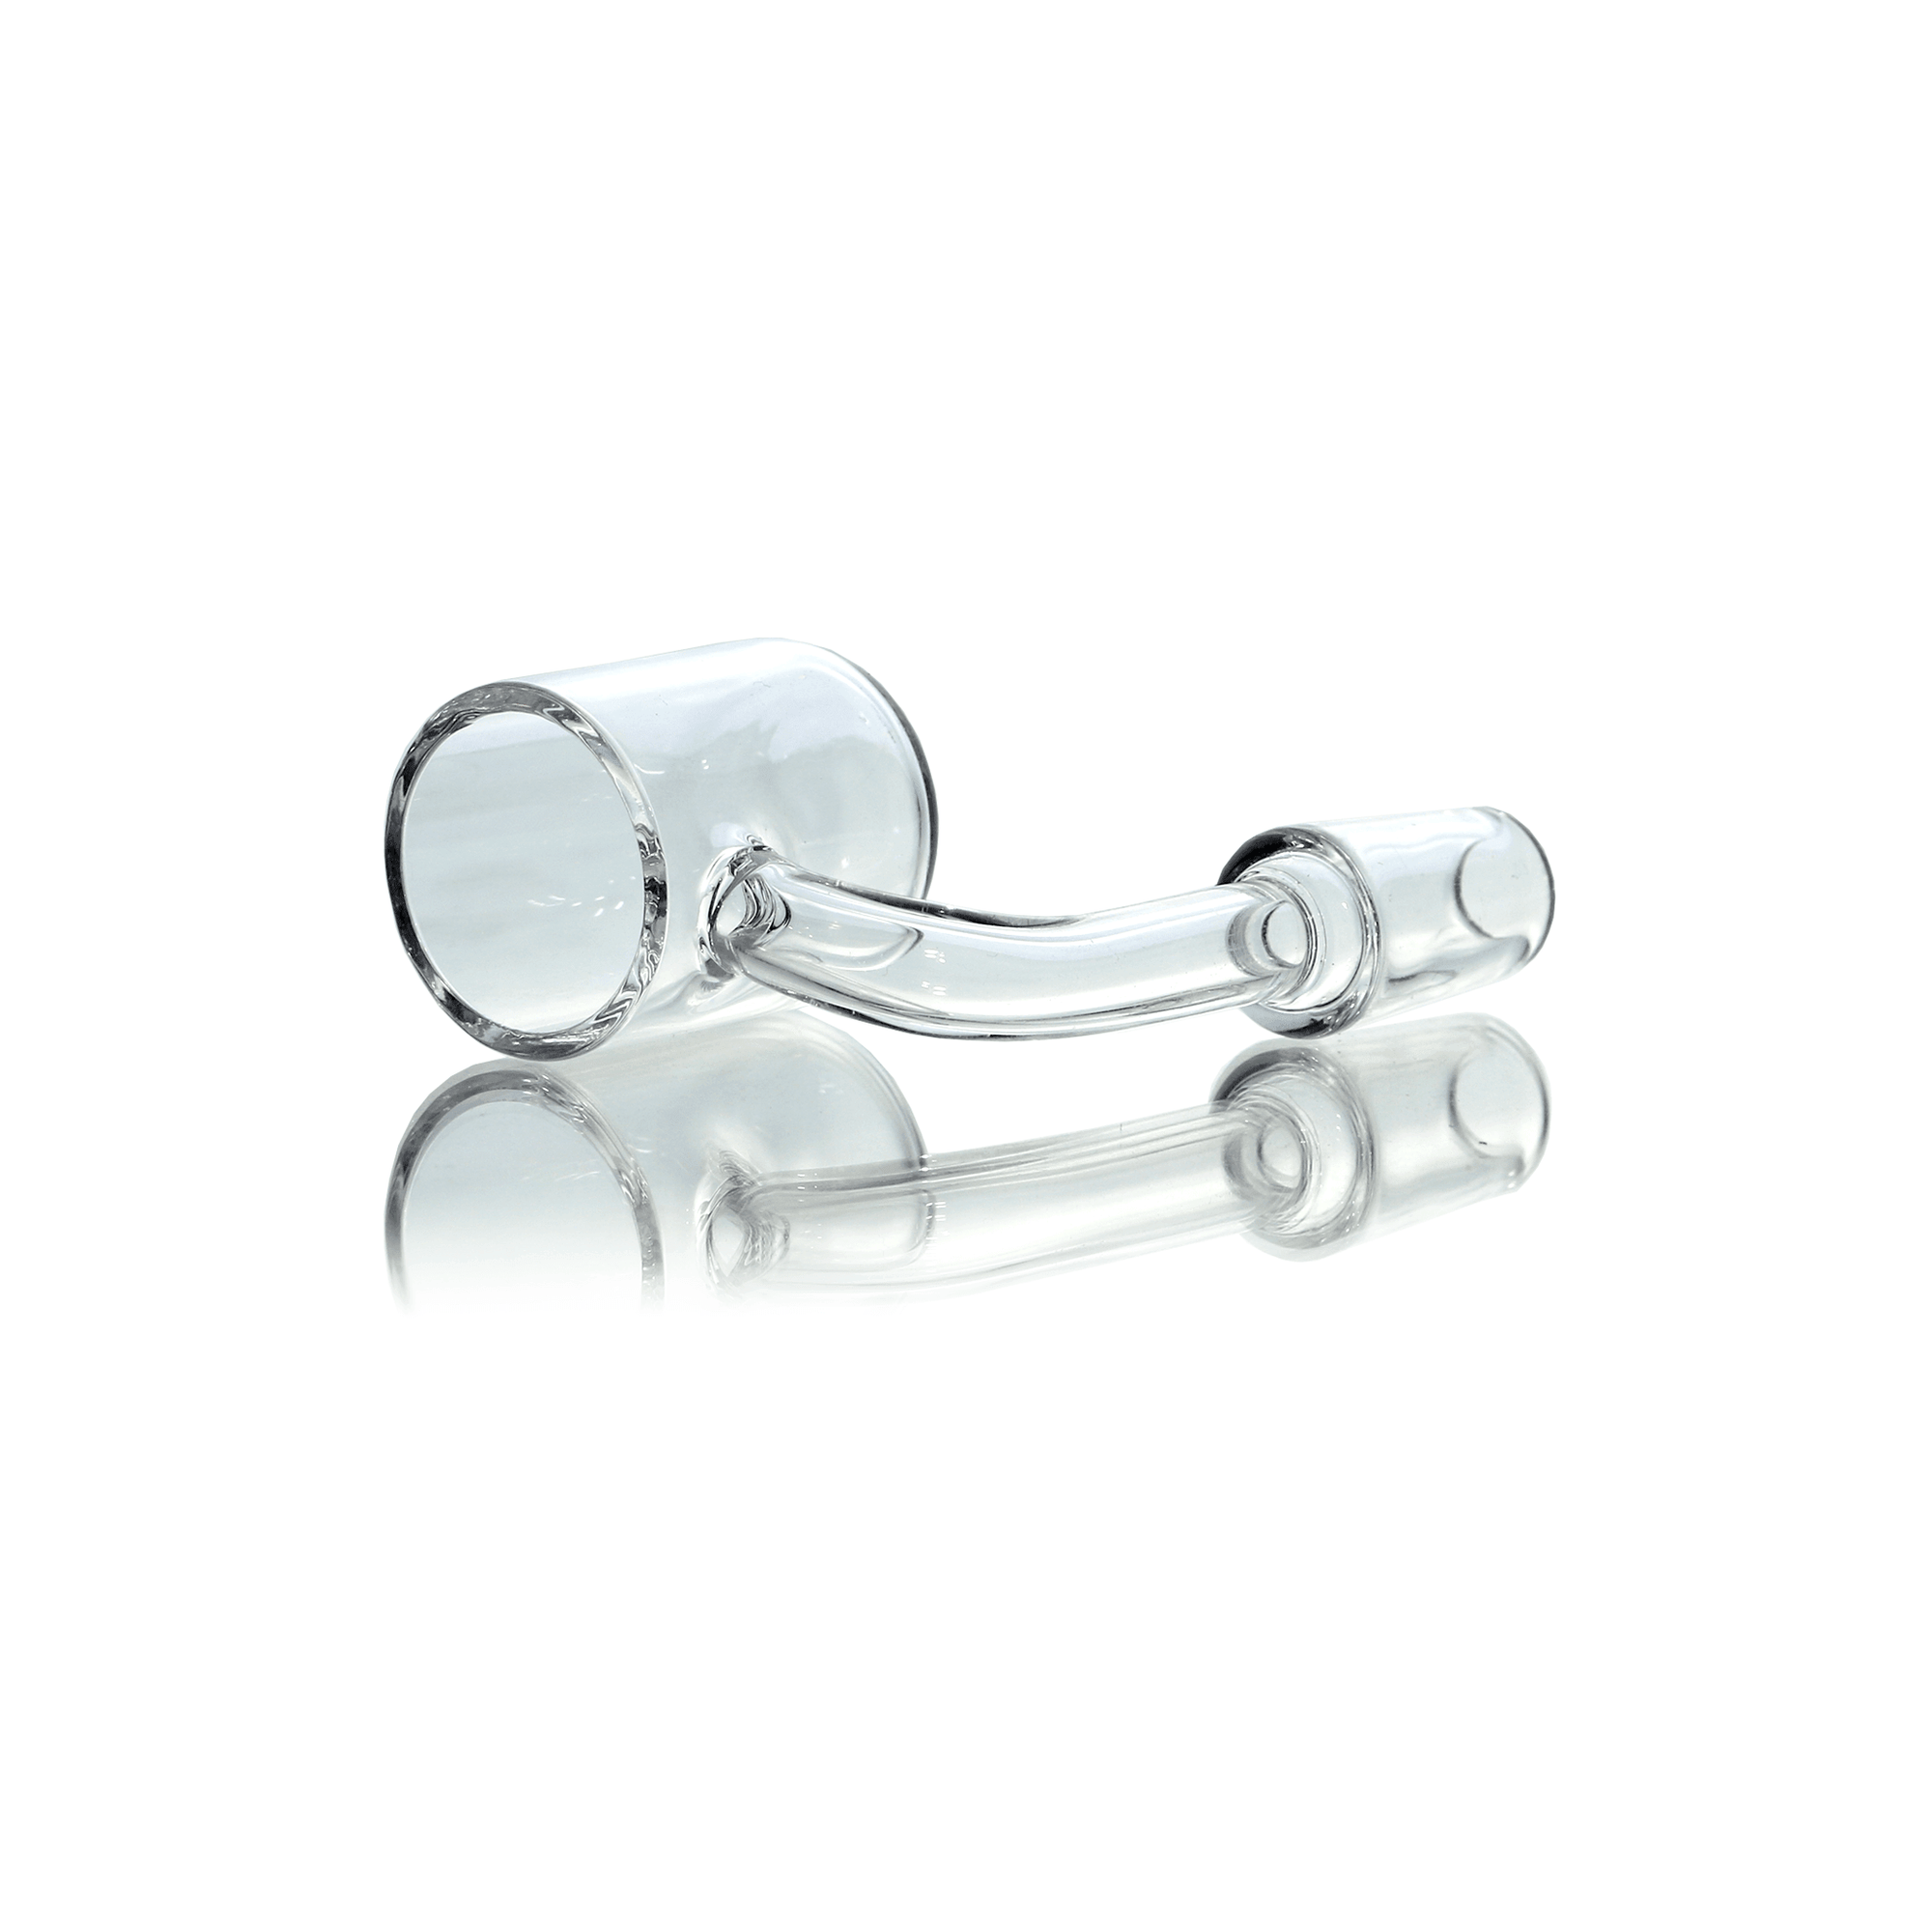 Flat Top Quartz Banger | 14mm Male With Cup Insert and Saucer Cap | Banger Angled Prone View | DW